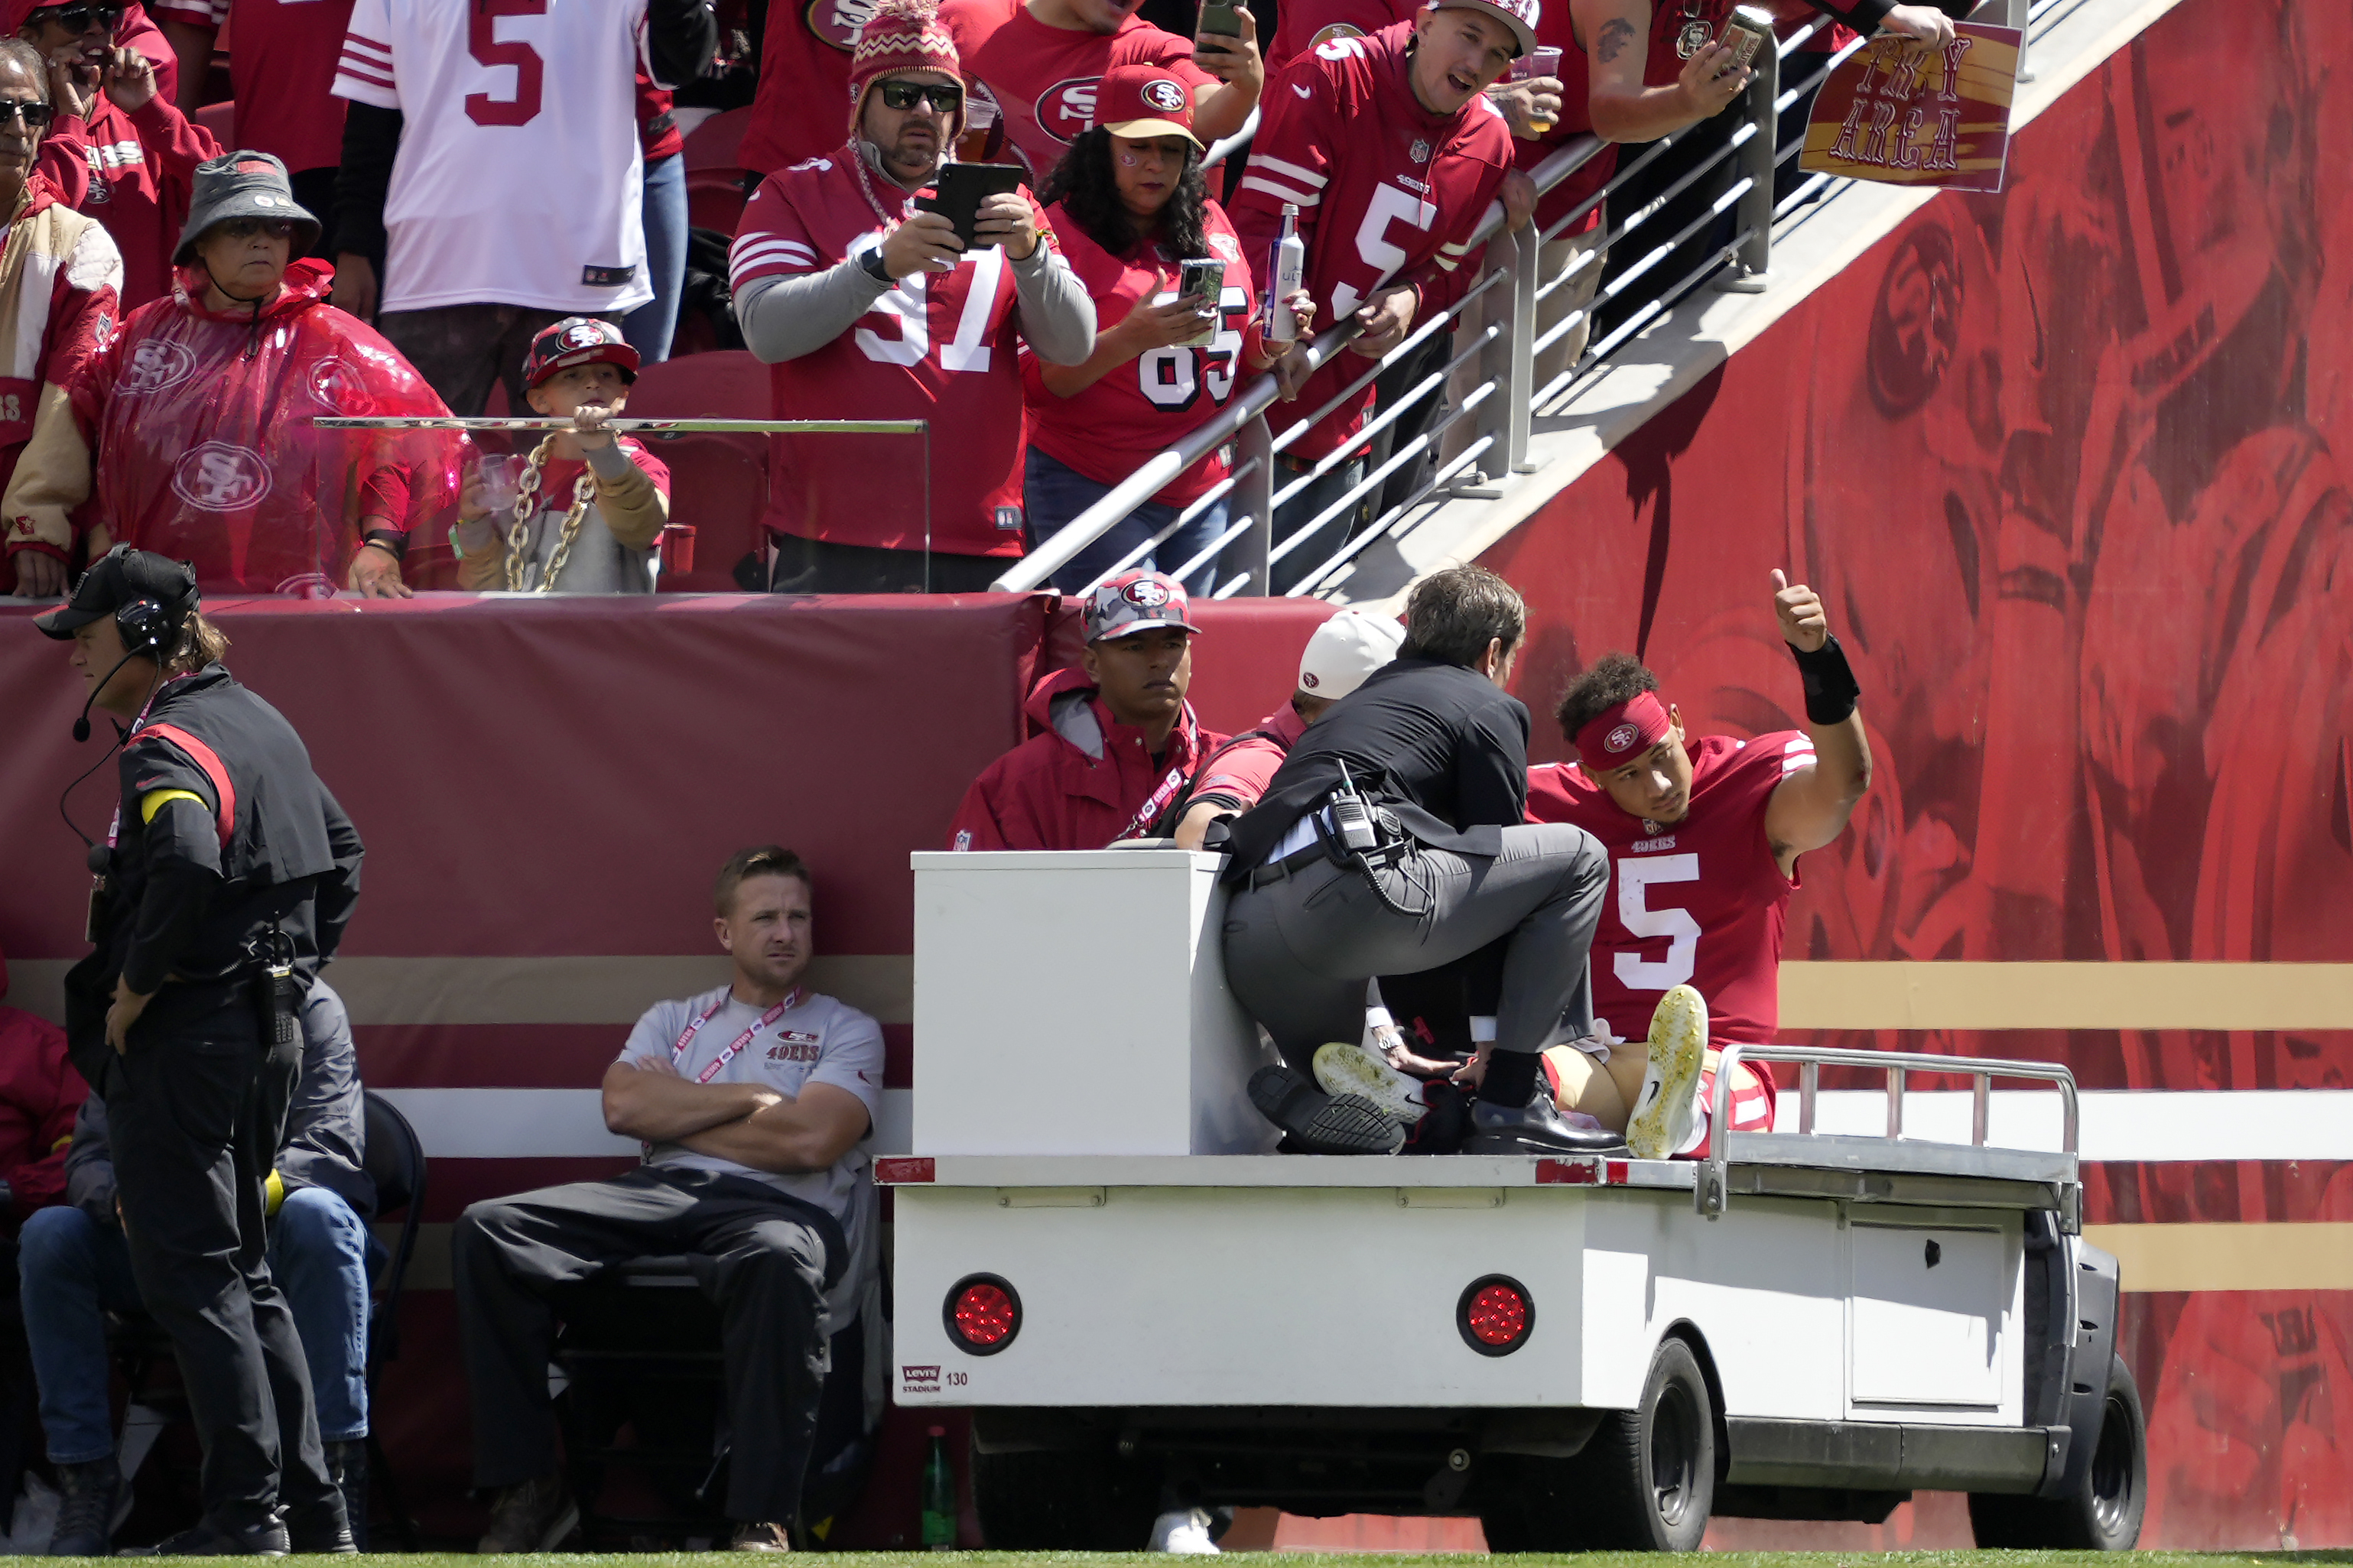 Raiders 34, 49ers 7: Trey Lance makes rough re-entry to NFL games